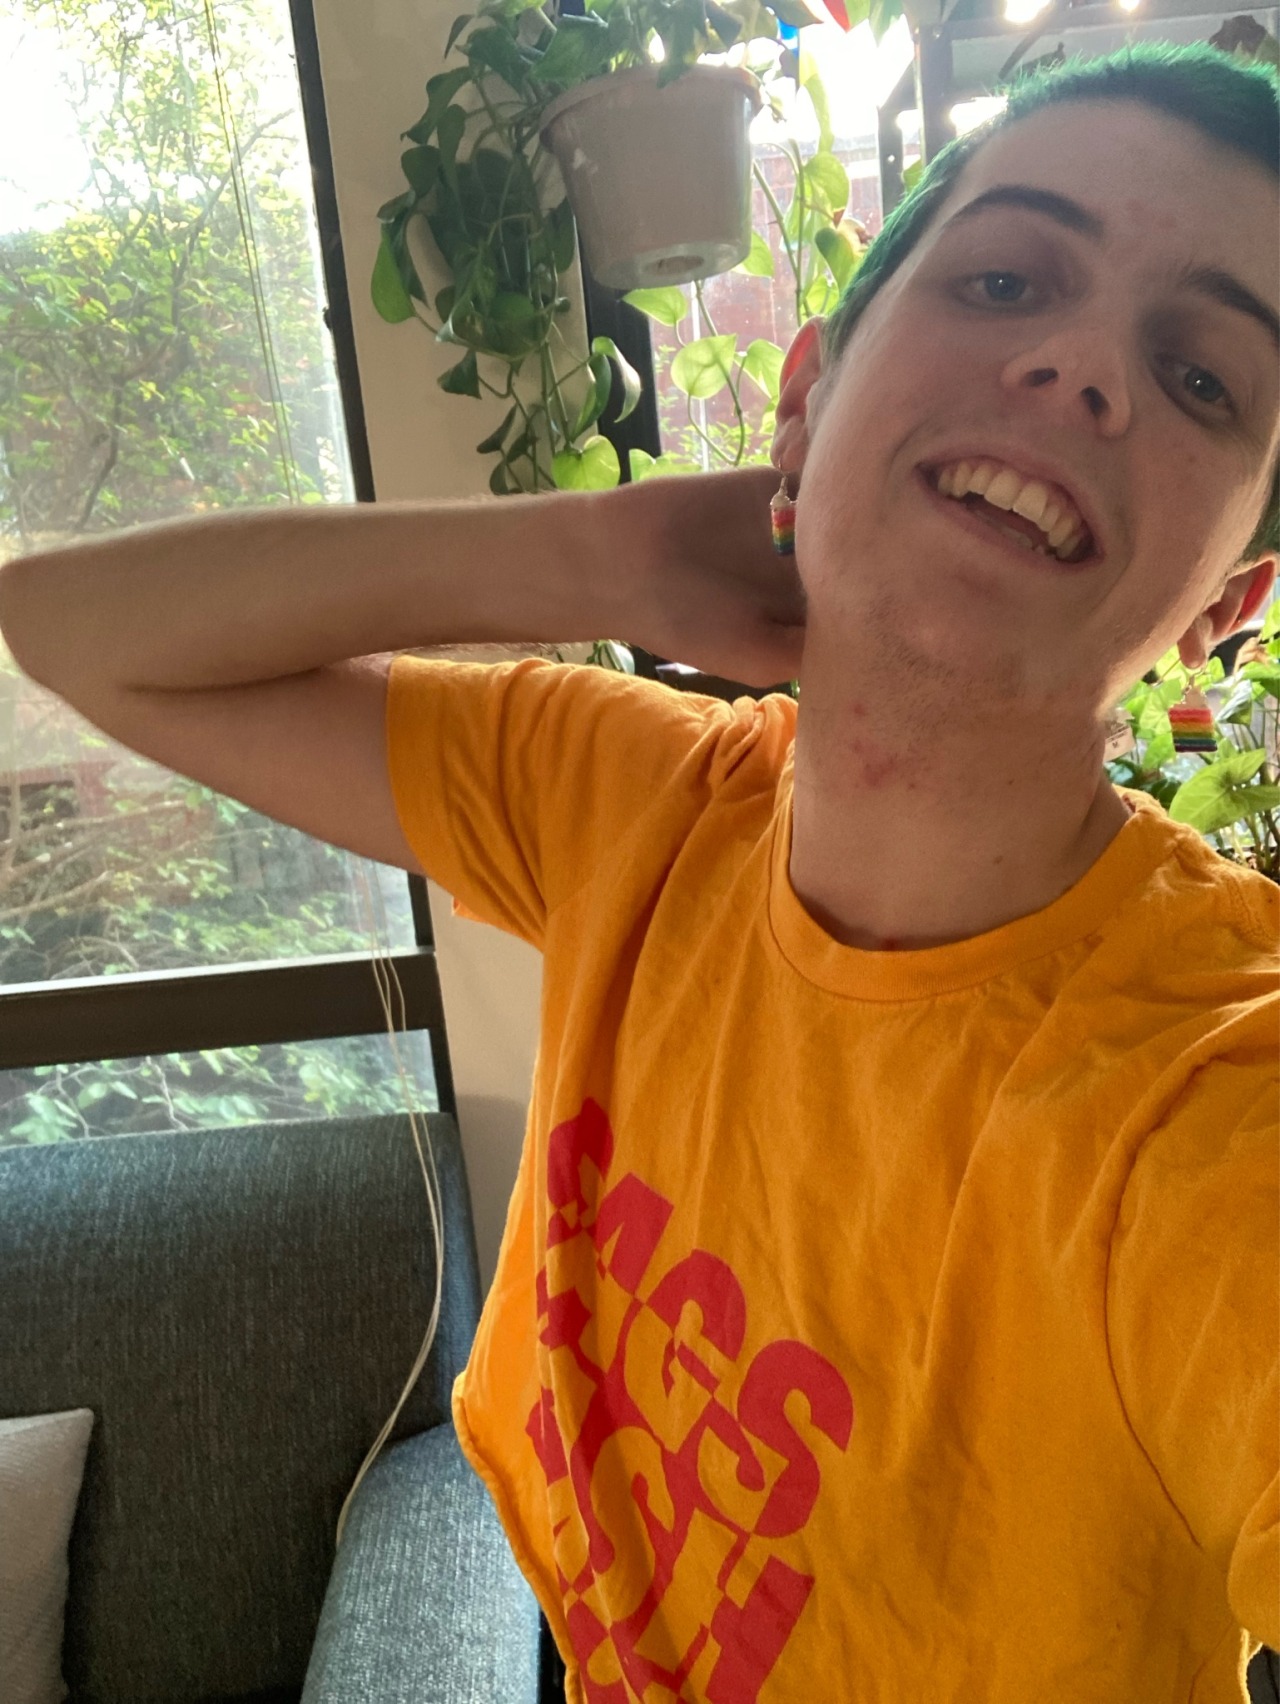 a photo of me, a white trans guy with short green hair wearing a yellow and pink crop top and standing in front of a lot of plants